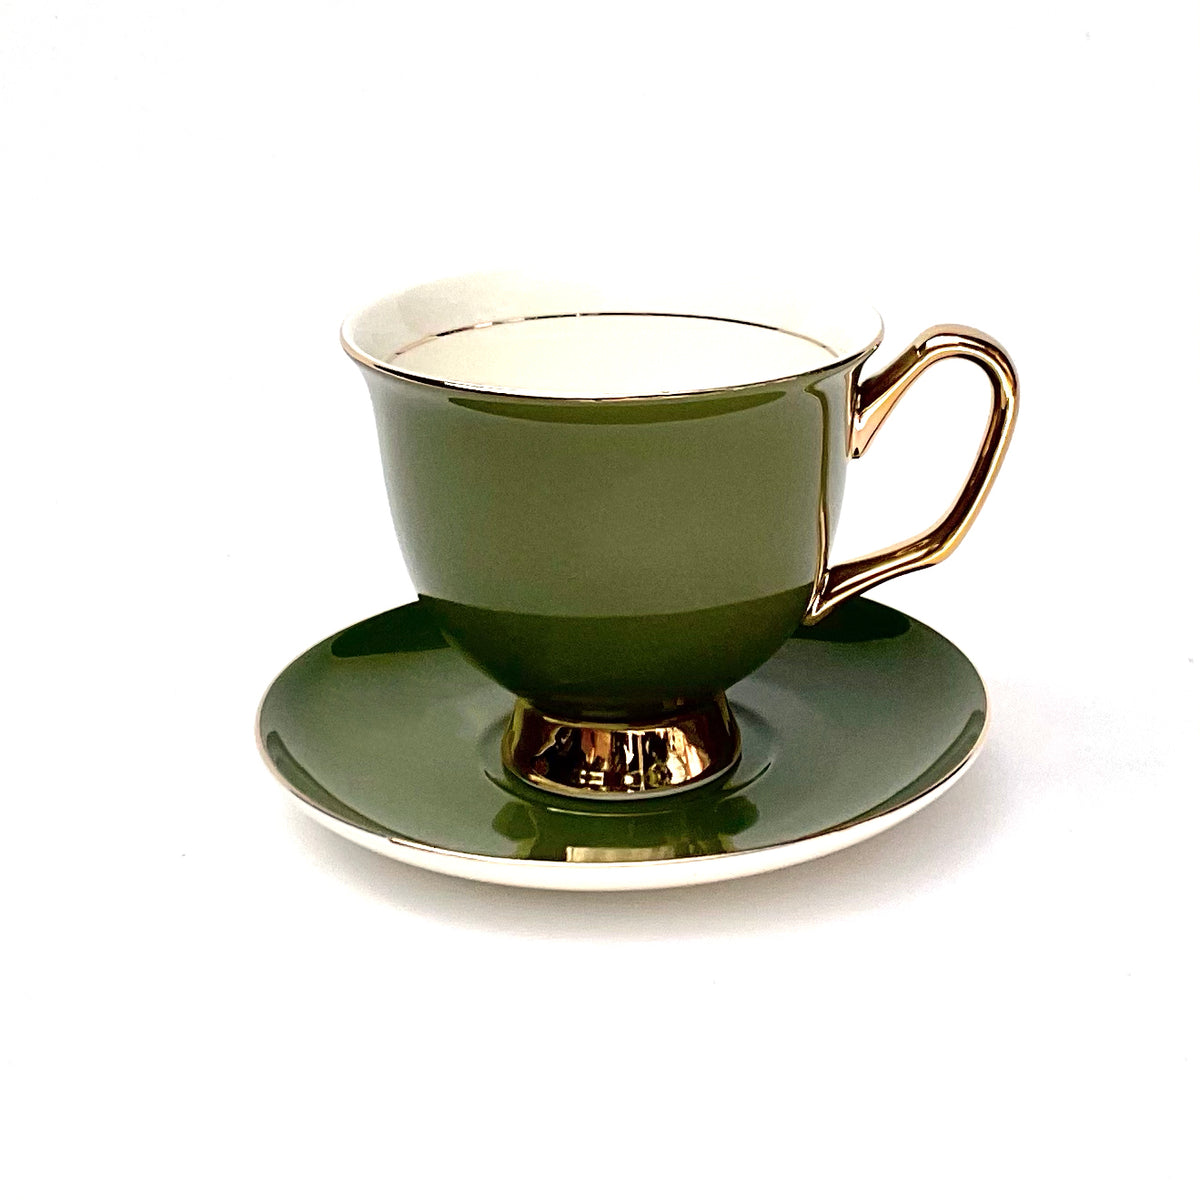 XL Olive Green Teacup and Saucer